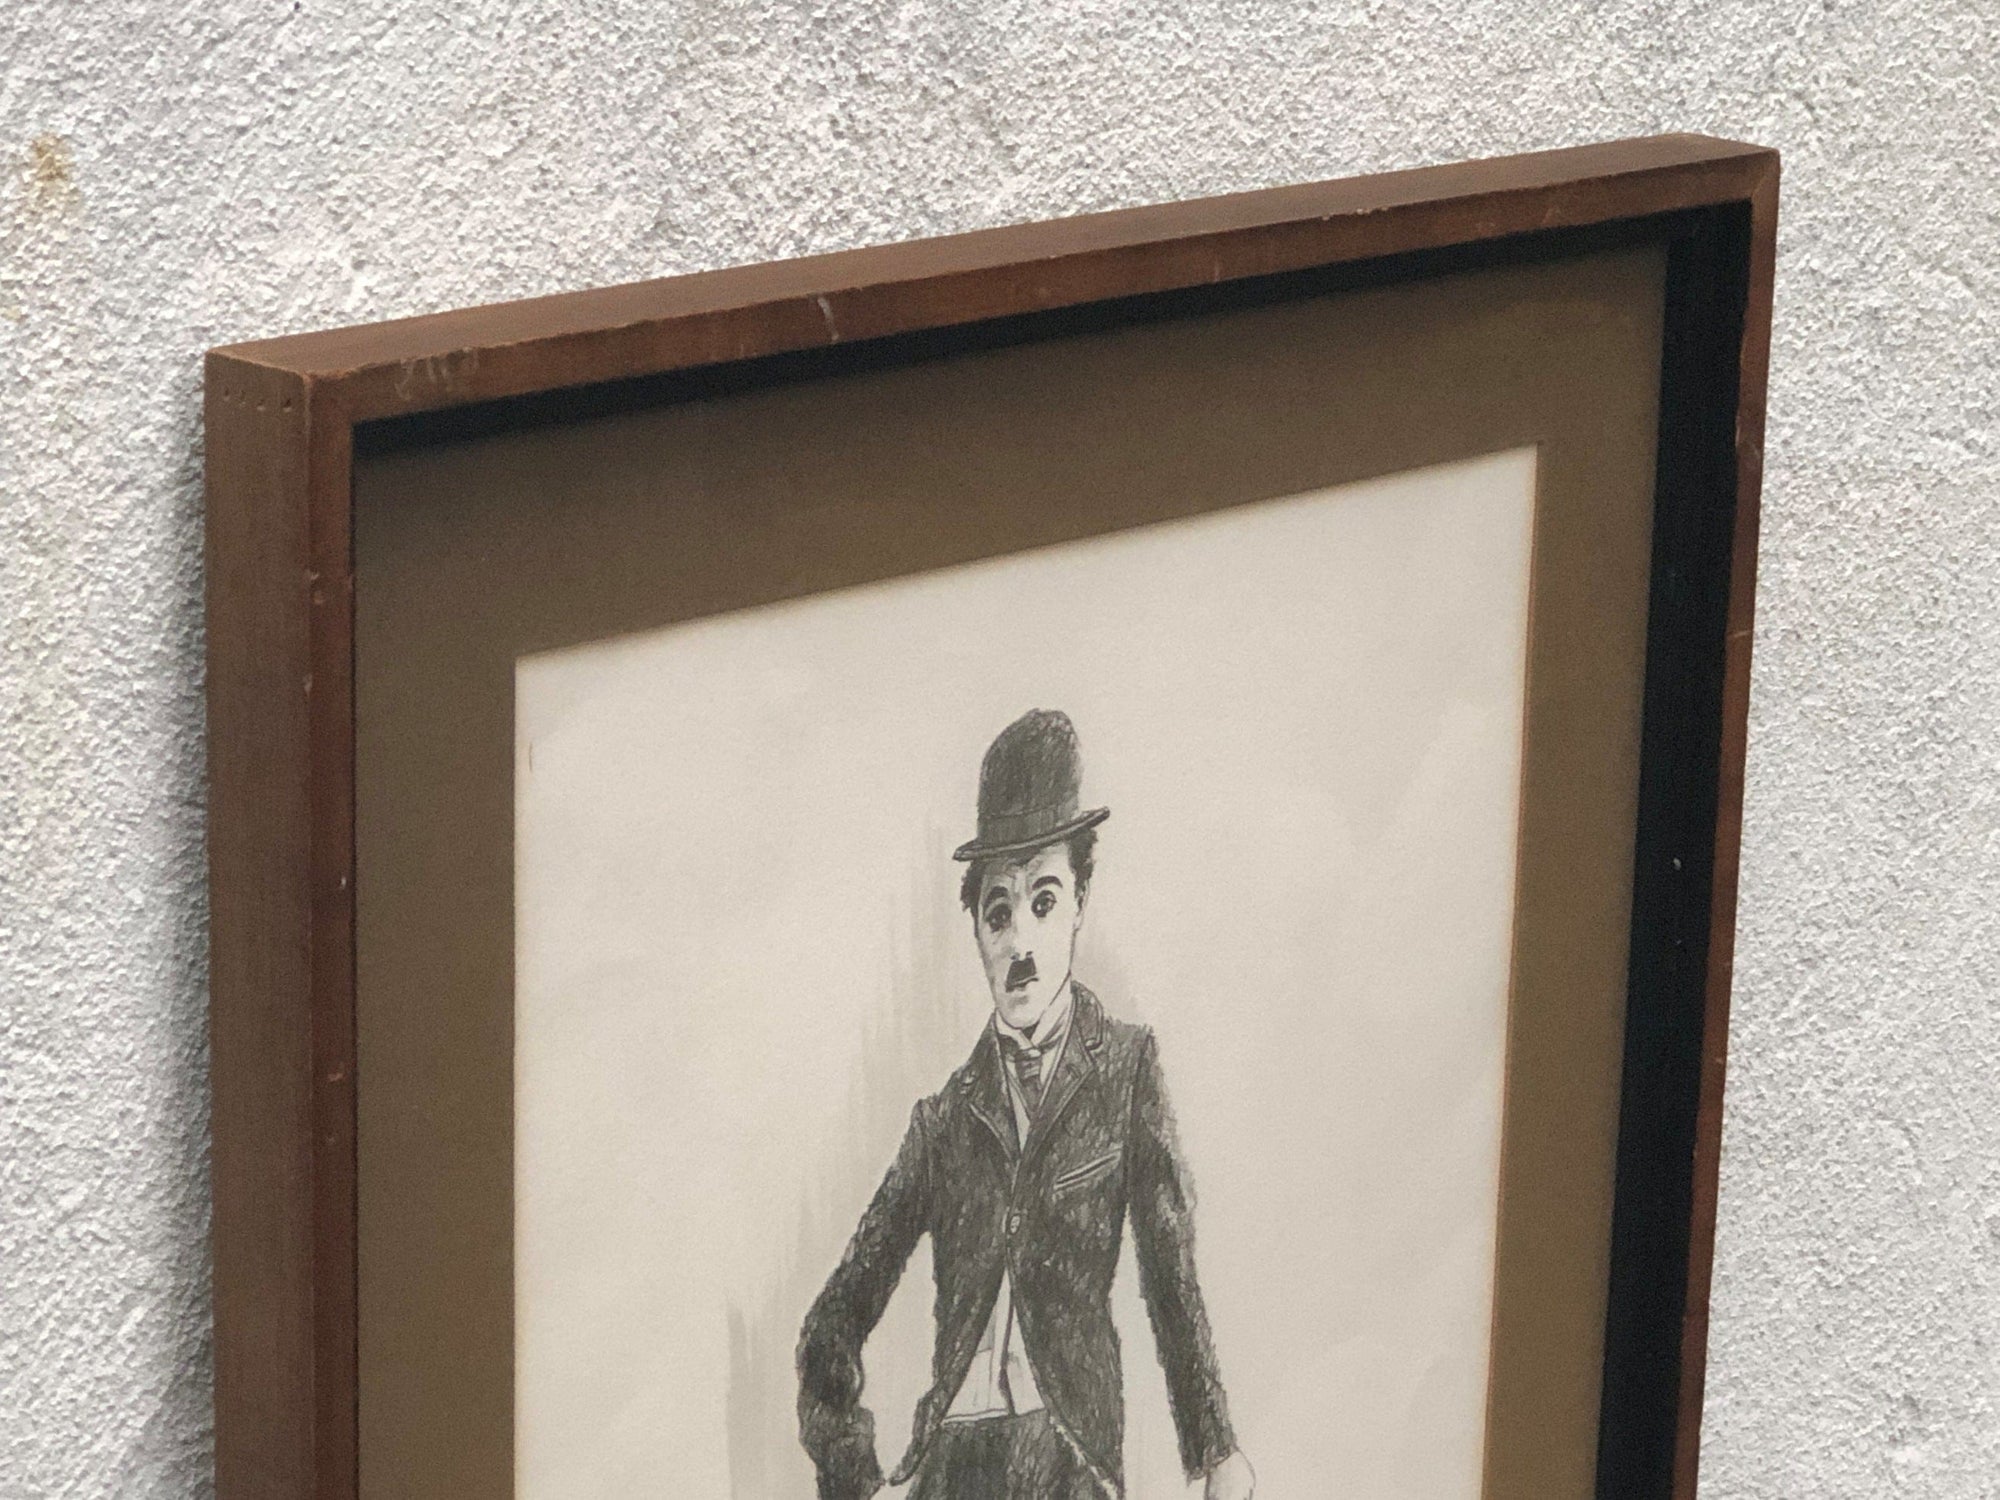 I Like Mike's Mid Century Modern Posters, Prints, & Visual Artwork Charlie Chaplin Vintage Framed Drawing Limited Print by Lance